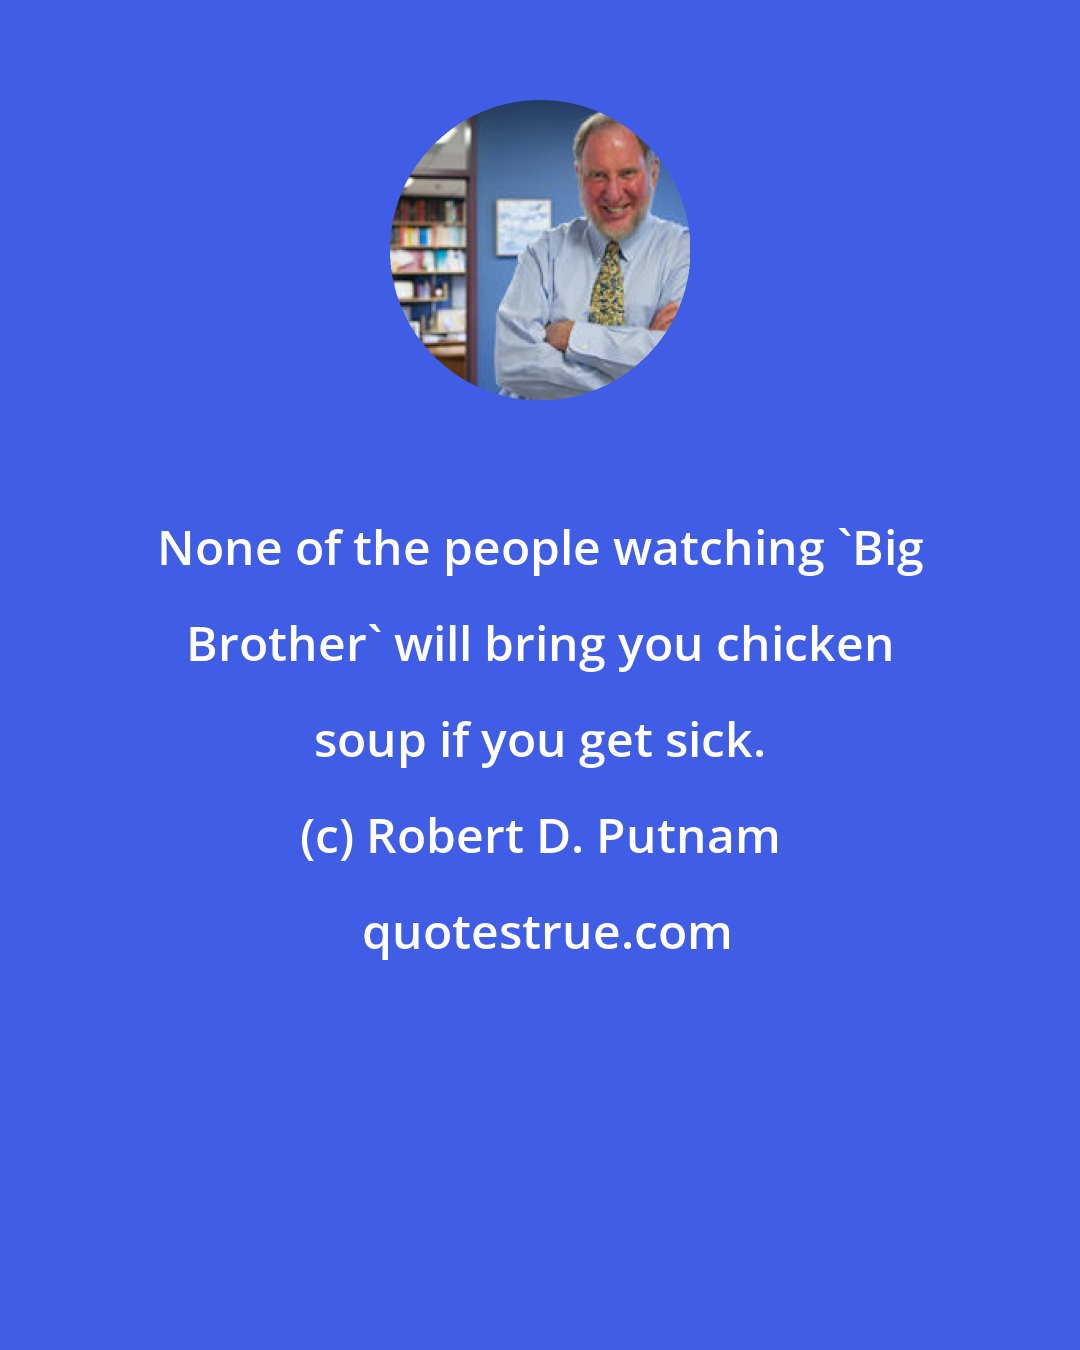 Robert D. Putnam: None of the people watching 'Big Brother' will bring you chicken soup if you get sick.